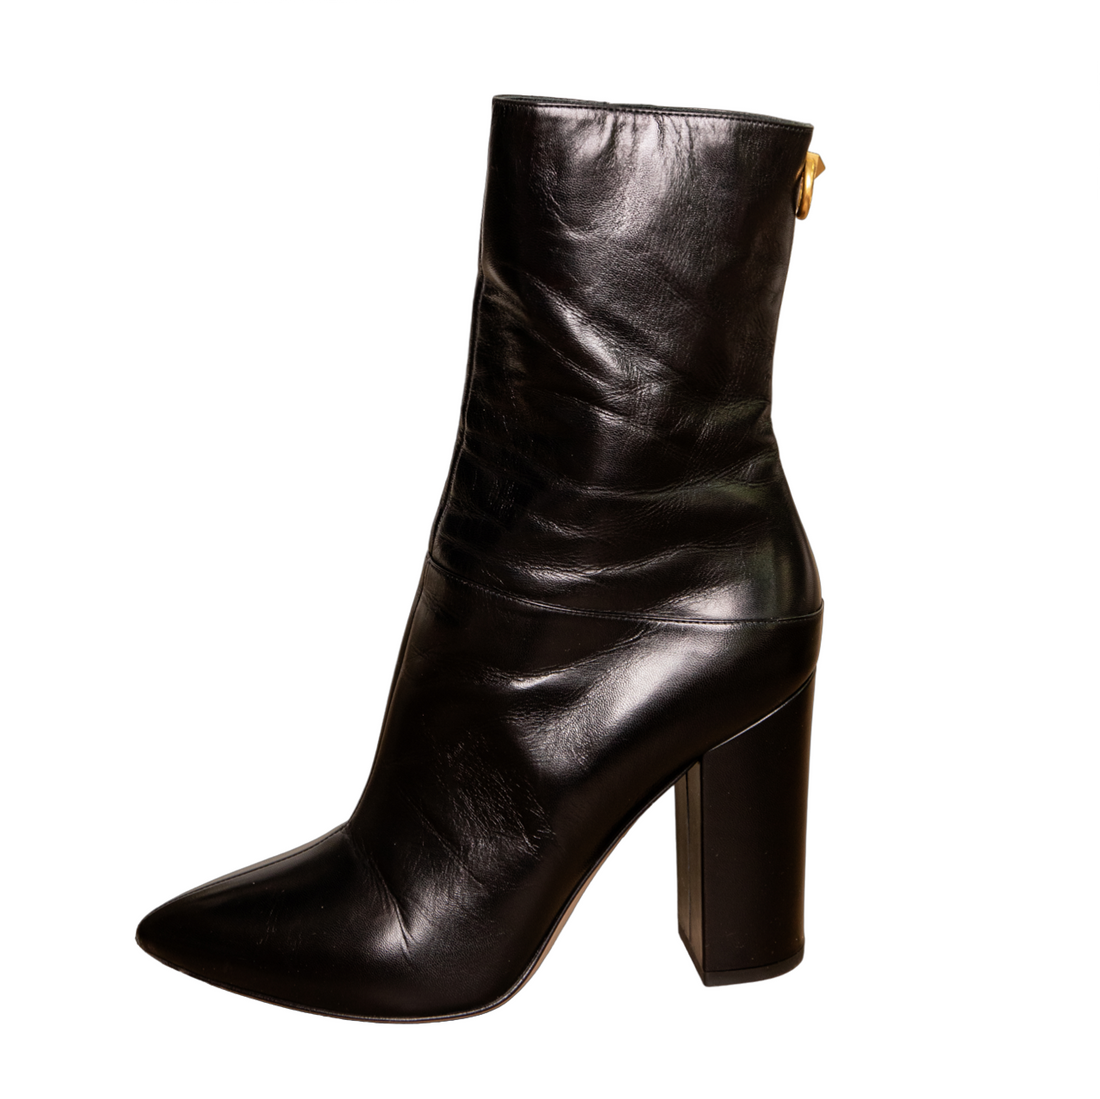 Valentino black ankle boots with gold design elements